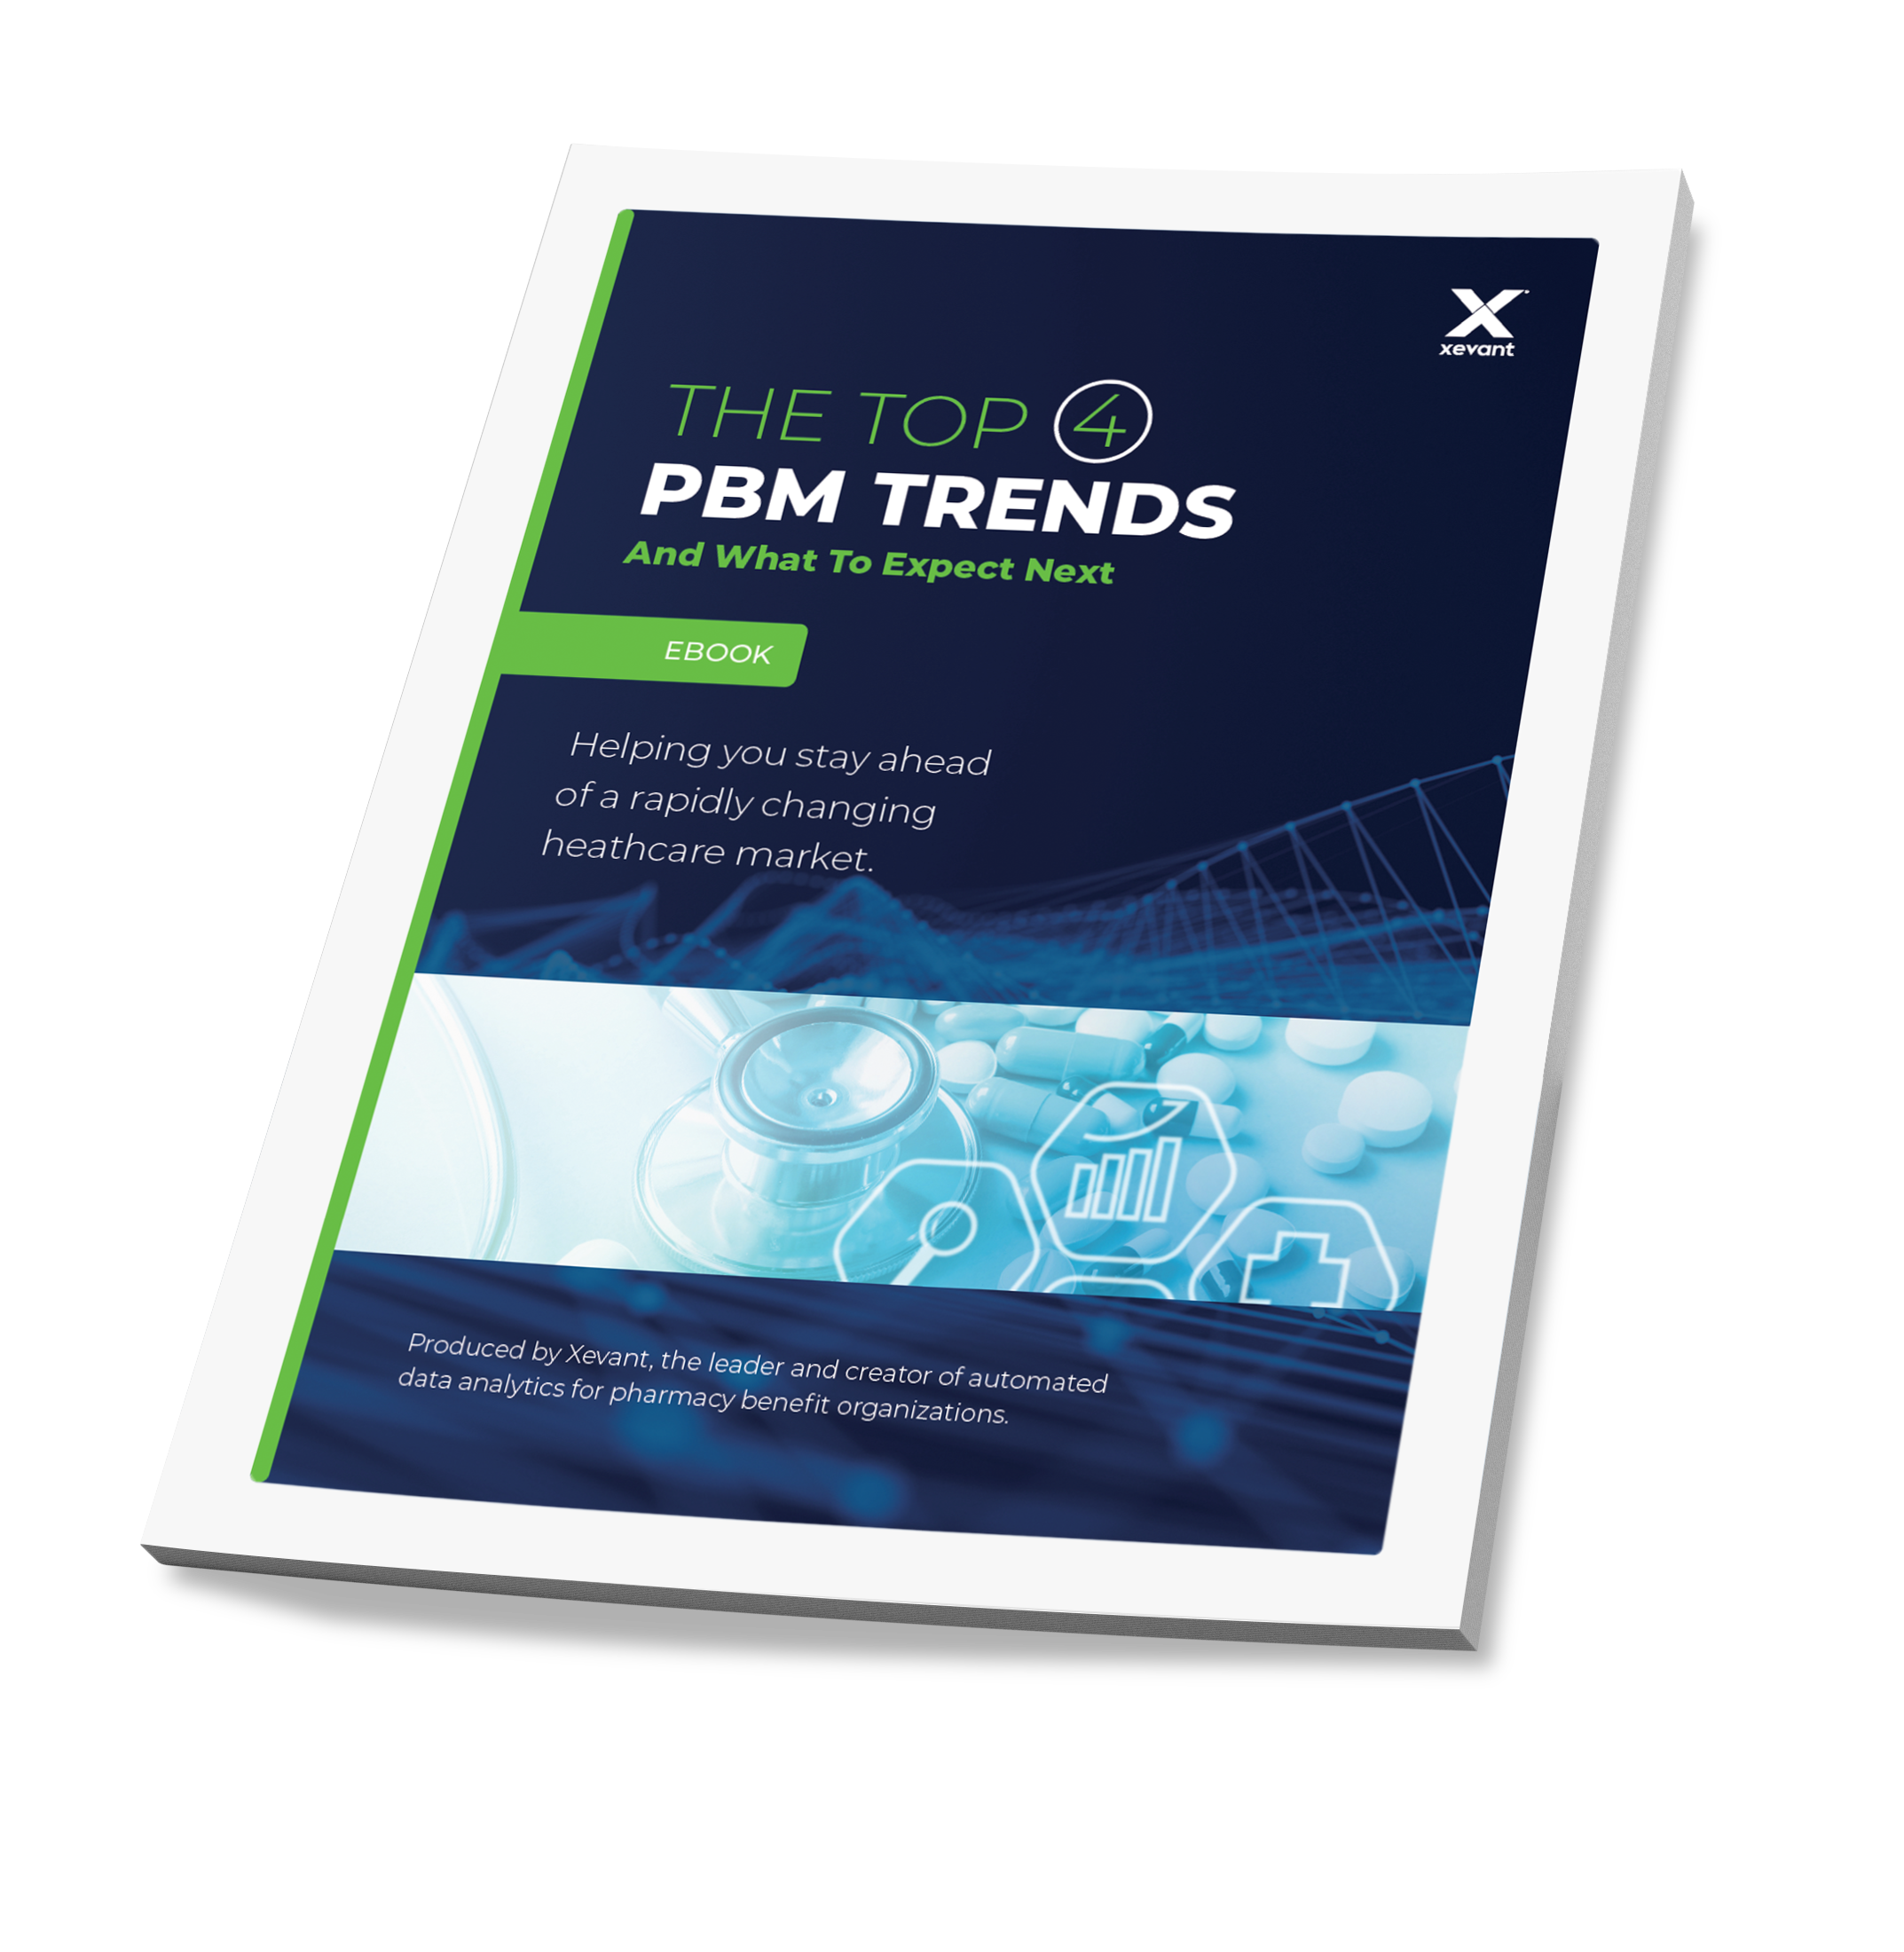 Front cover image for The Top 4 PBM Trends eBook